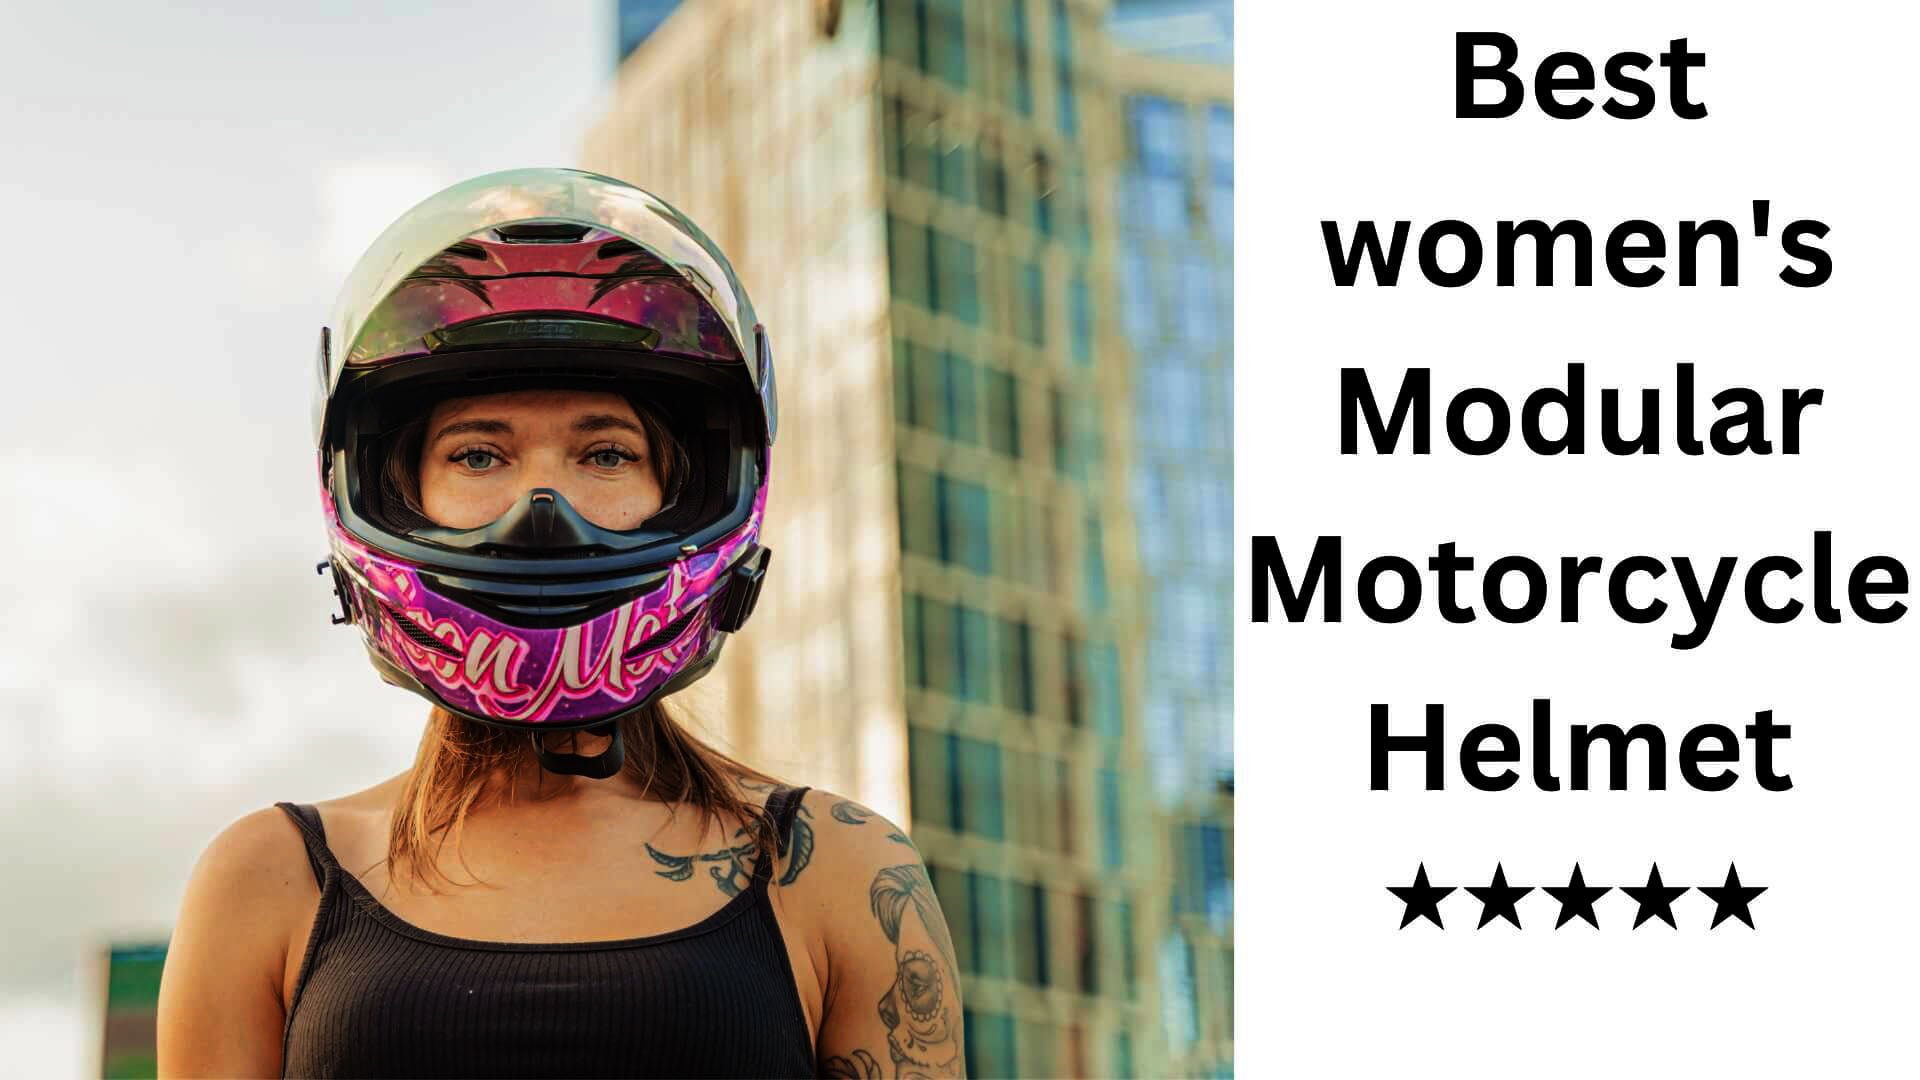 The 10 Best Women’s Modular Motorcycle Helmets for Safe Riding